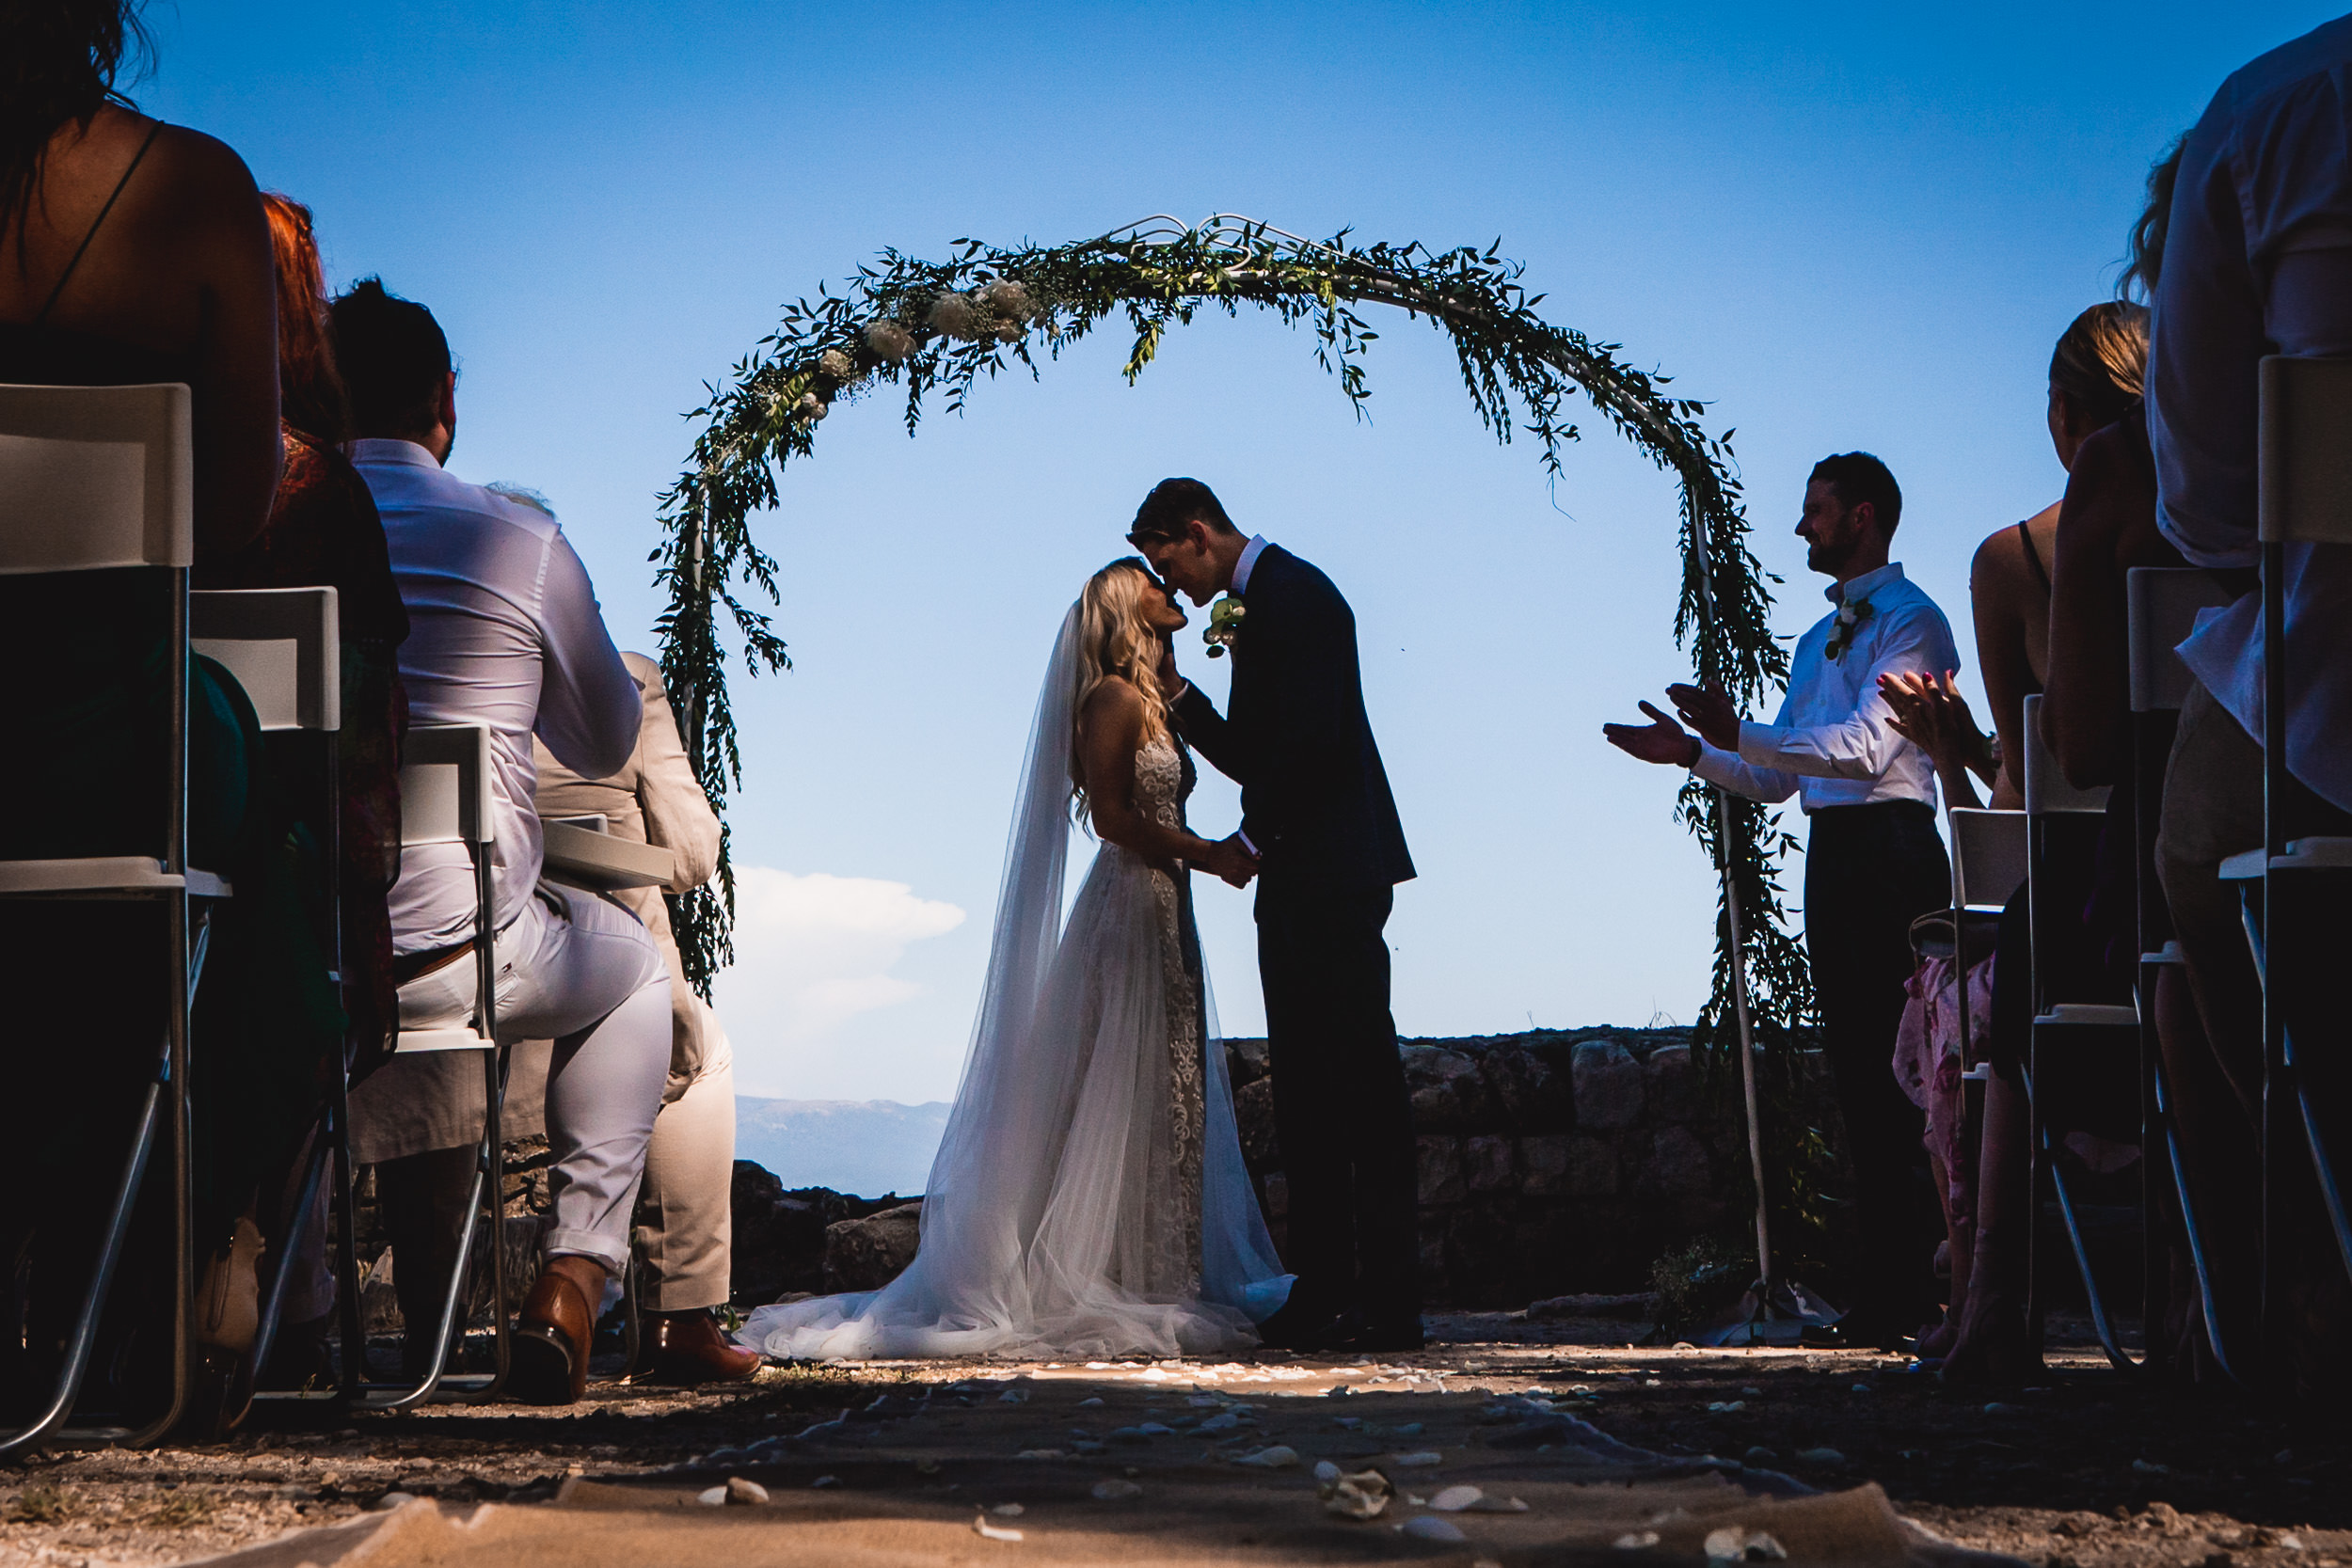 A bride and groom capture a kiss during their wedding ceremony in a beautiful wedding photo.